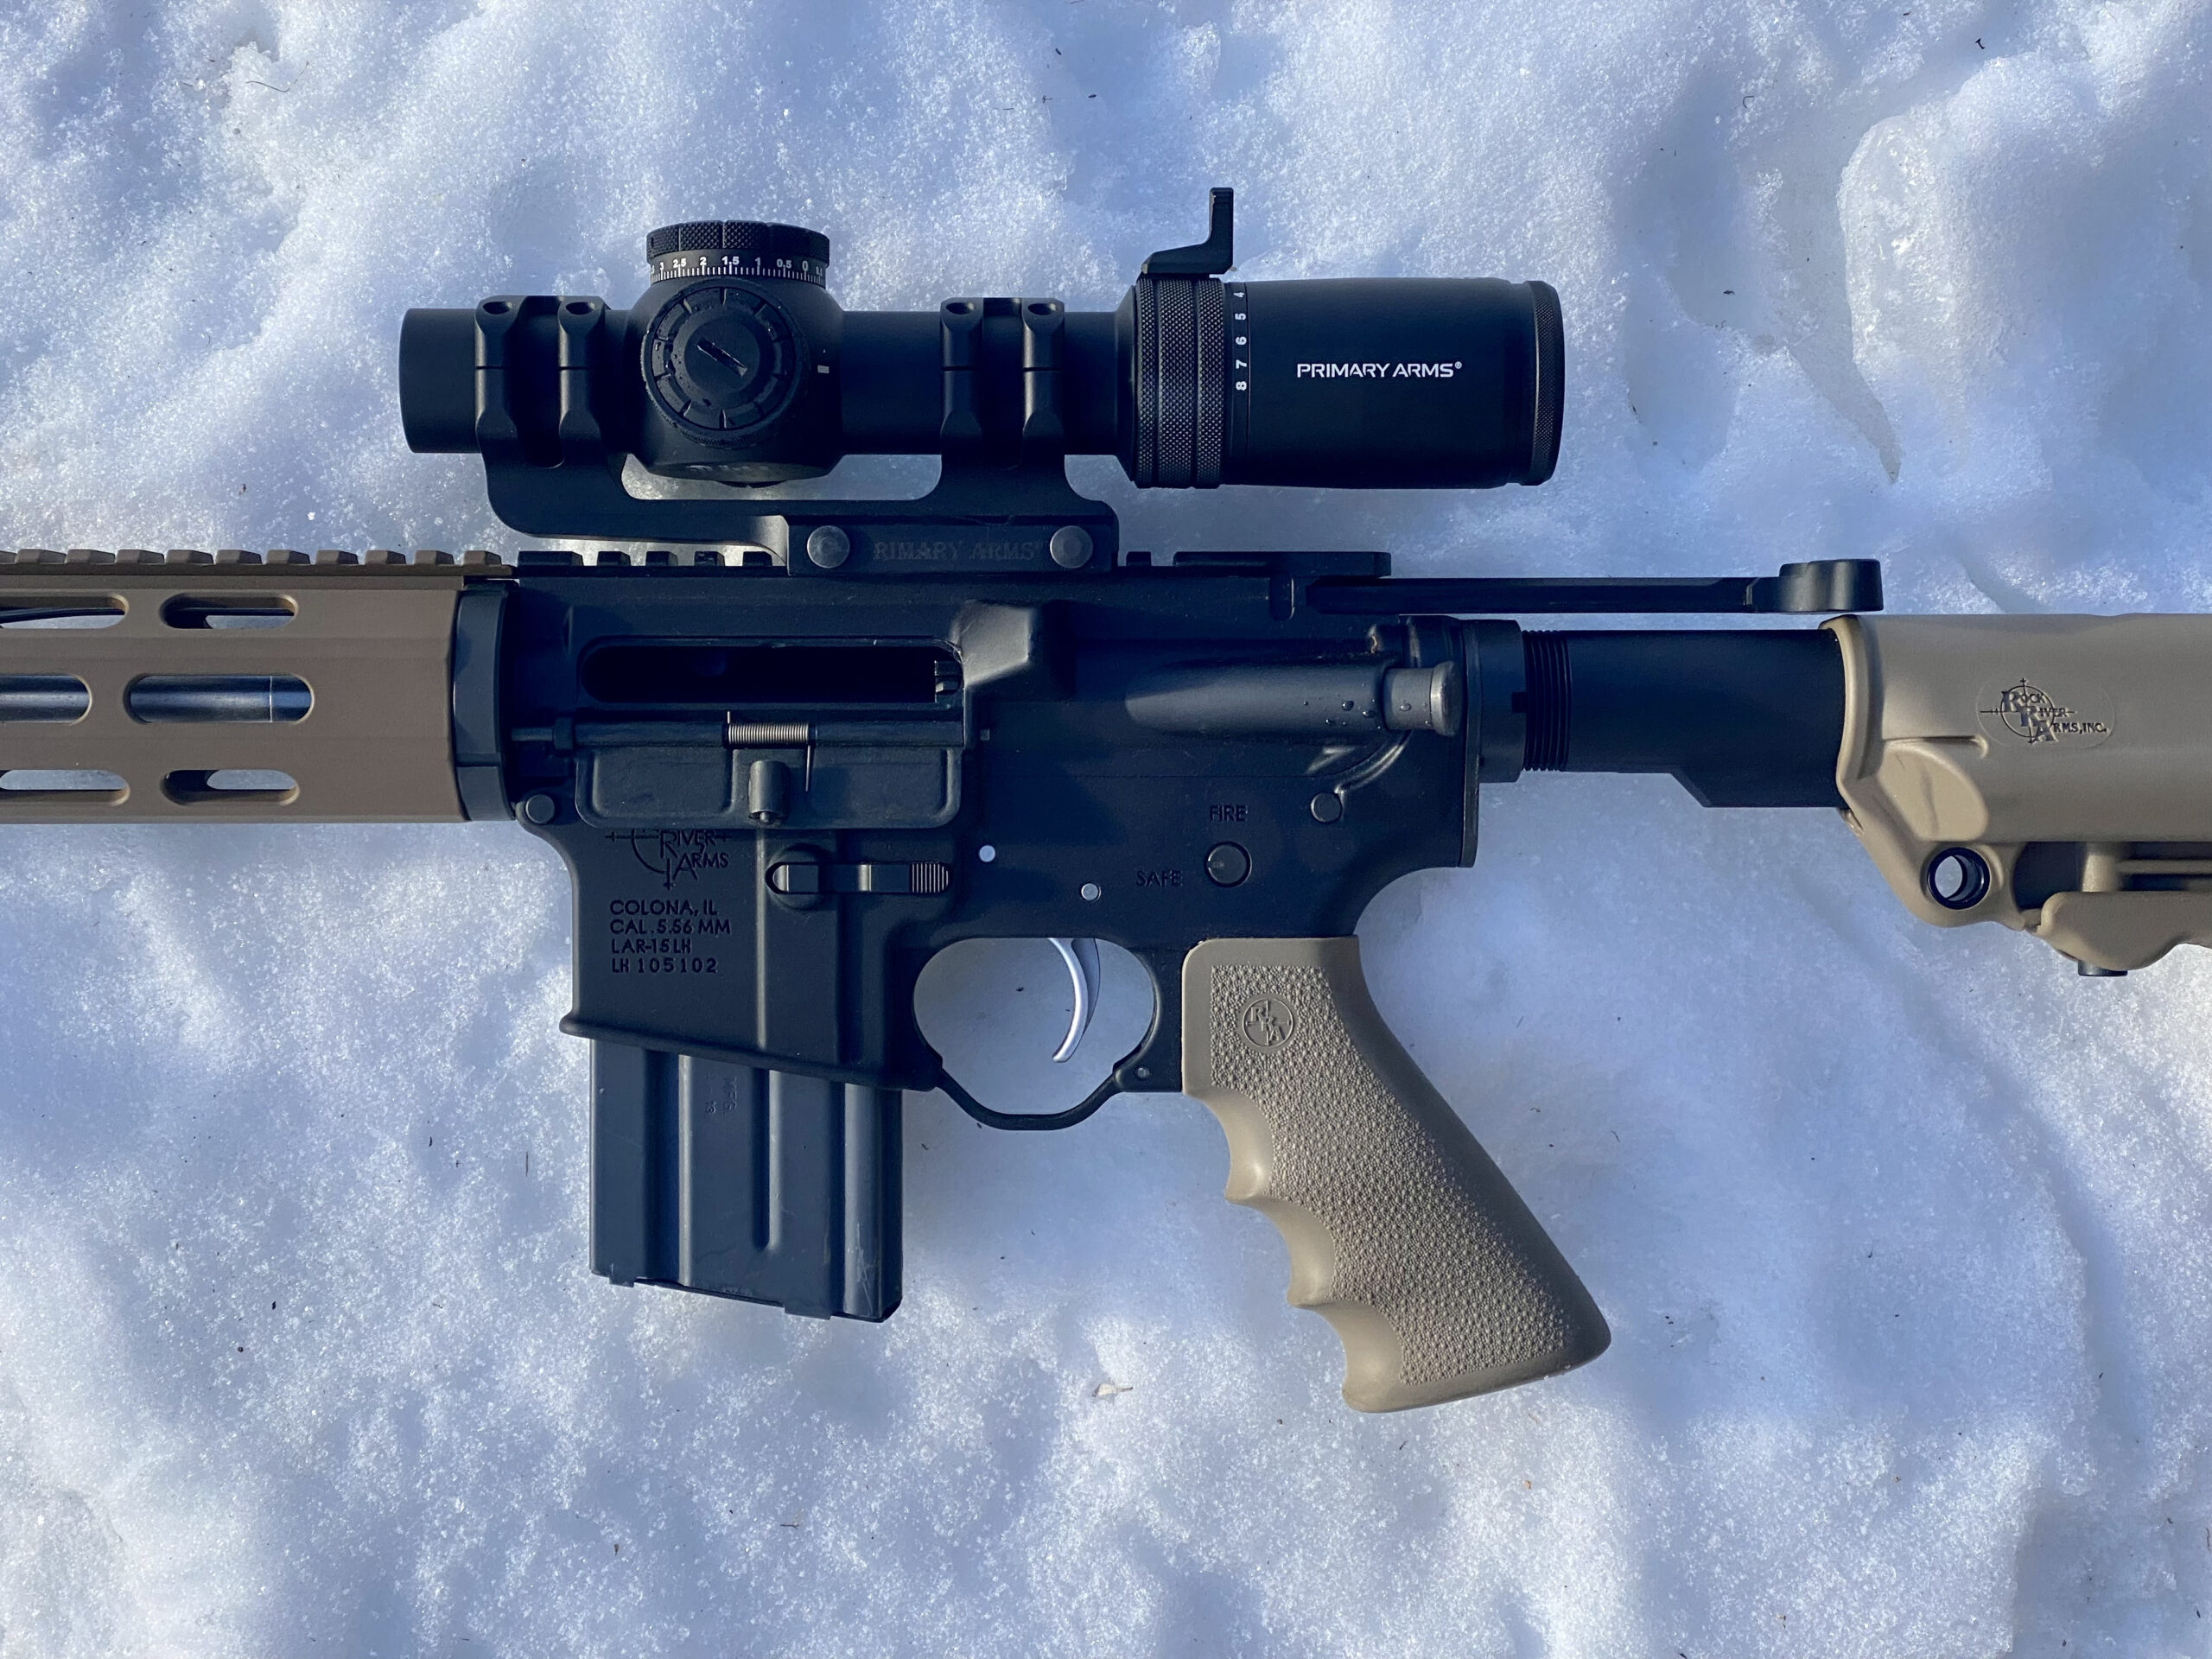 Primary Arms' PLx 1-8x24 was the best precision LPVO during testing.